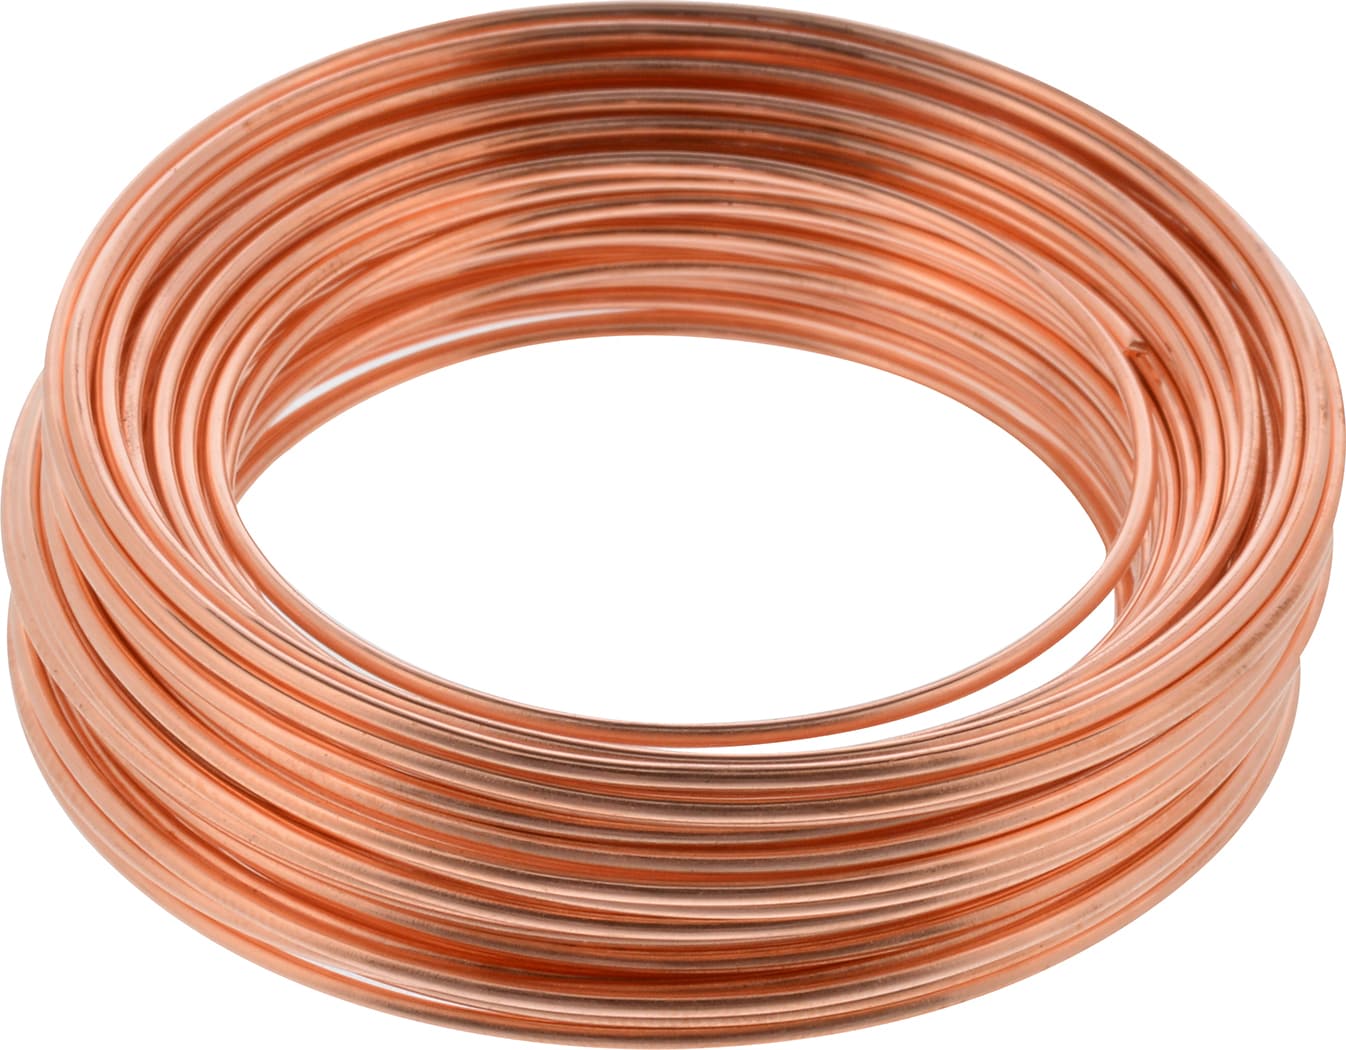 Hillman 14lb Copper Wire 18 Gauge 25 Feet in the Picture Hangers